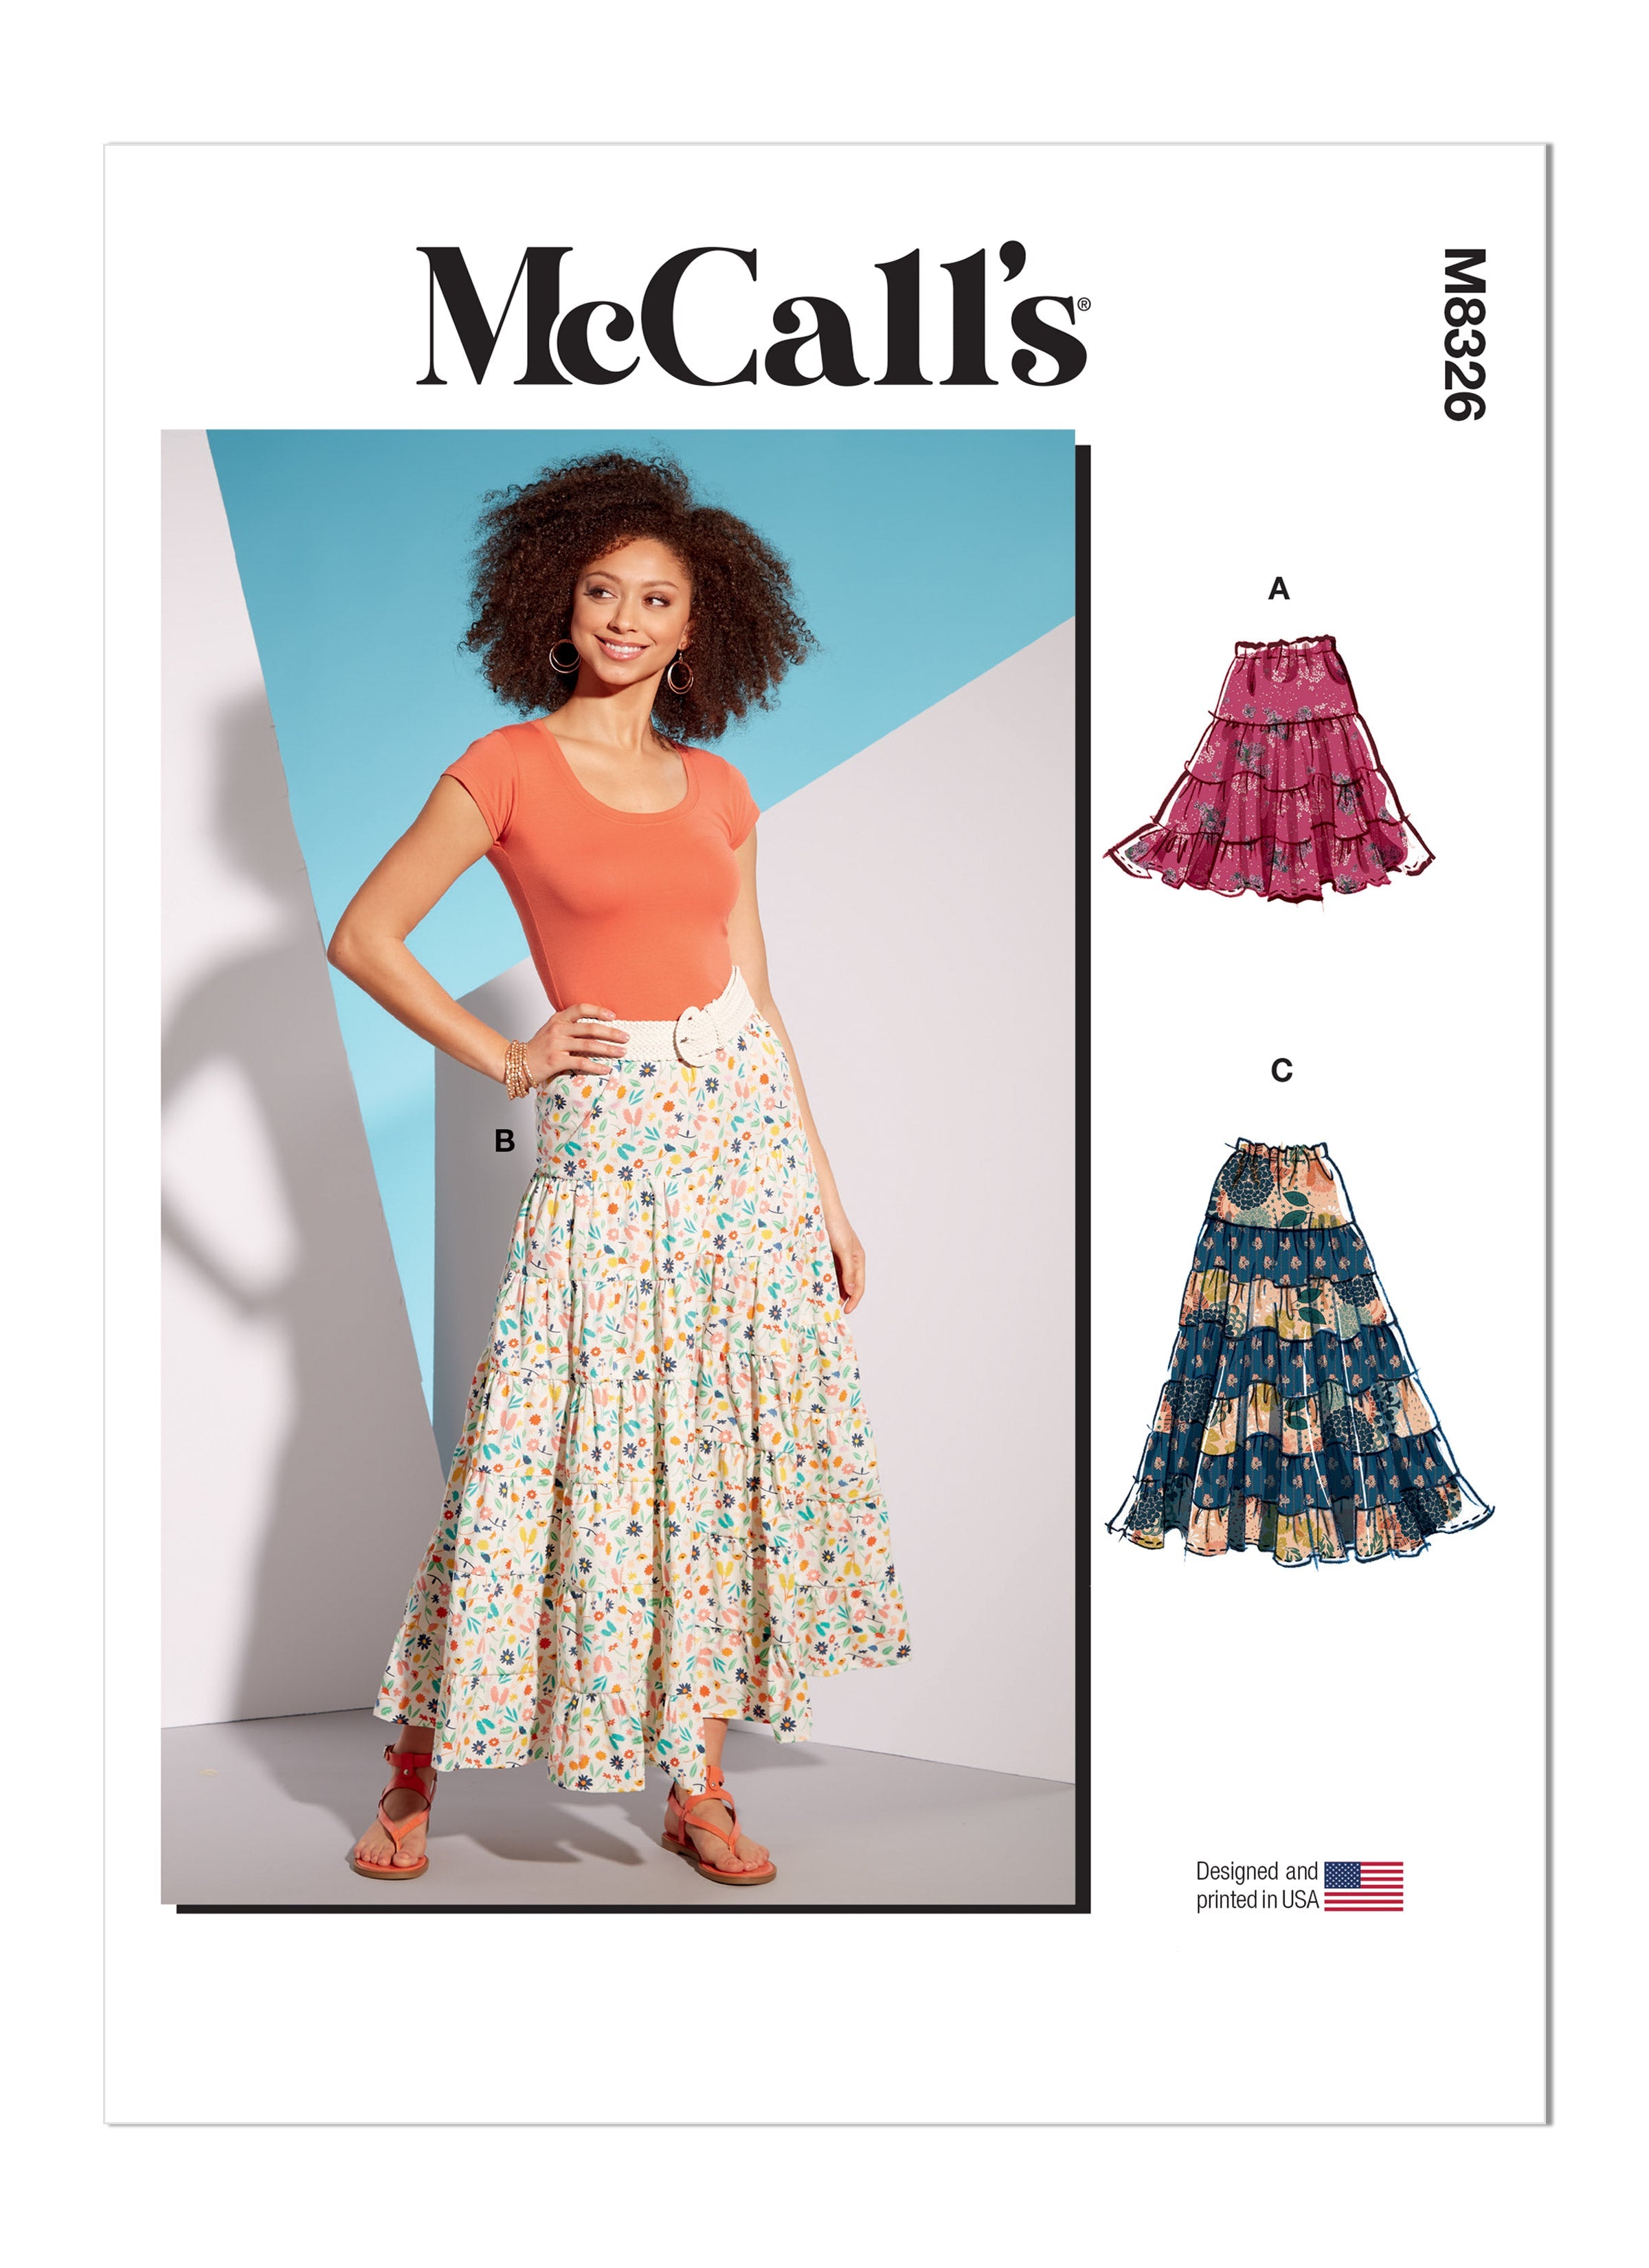 McCall's sewing pattern 8326 Skirts from Jaycotts Sewing Supplies